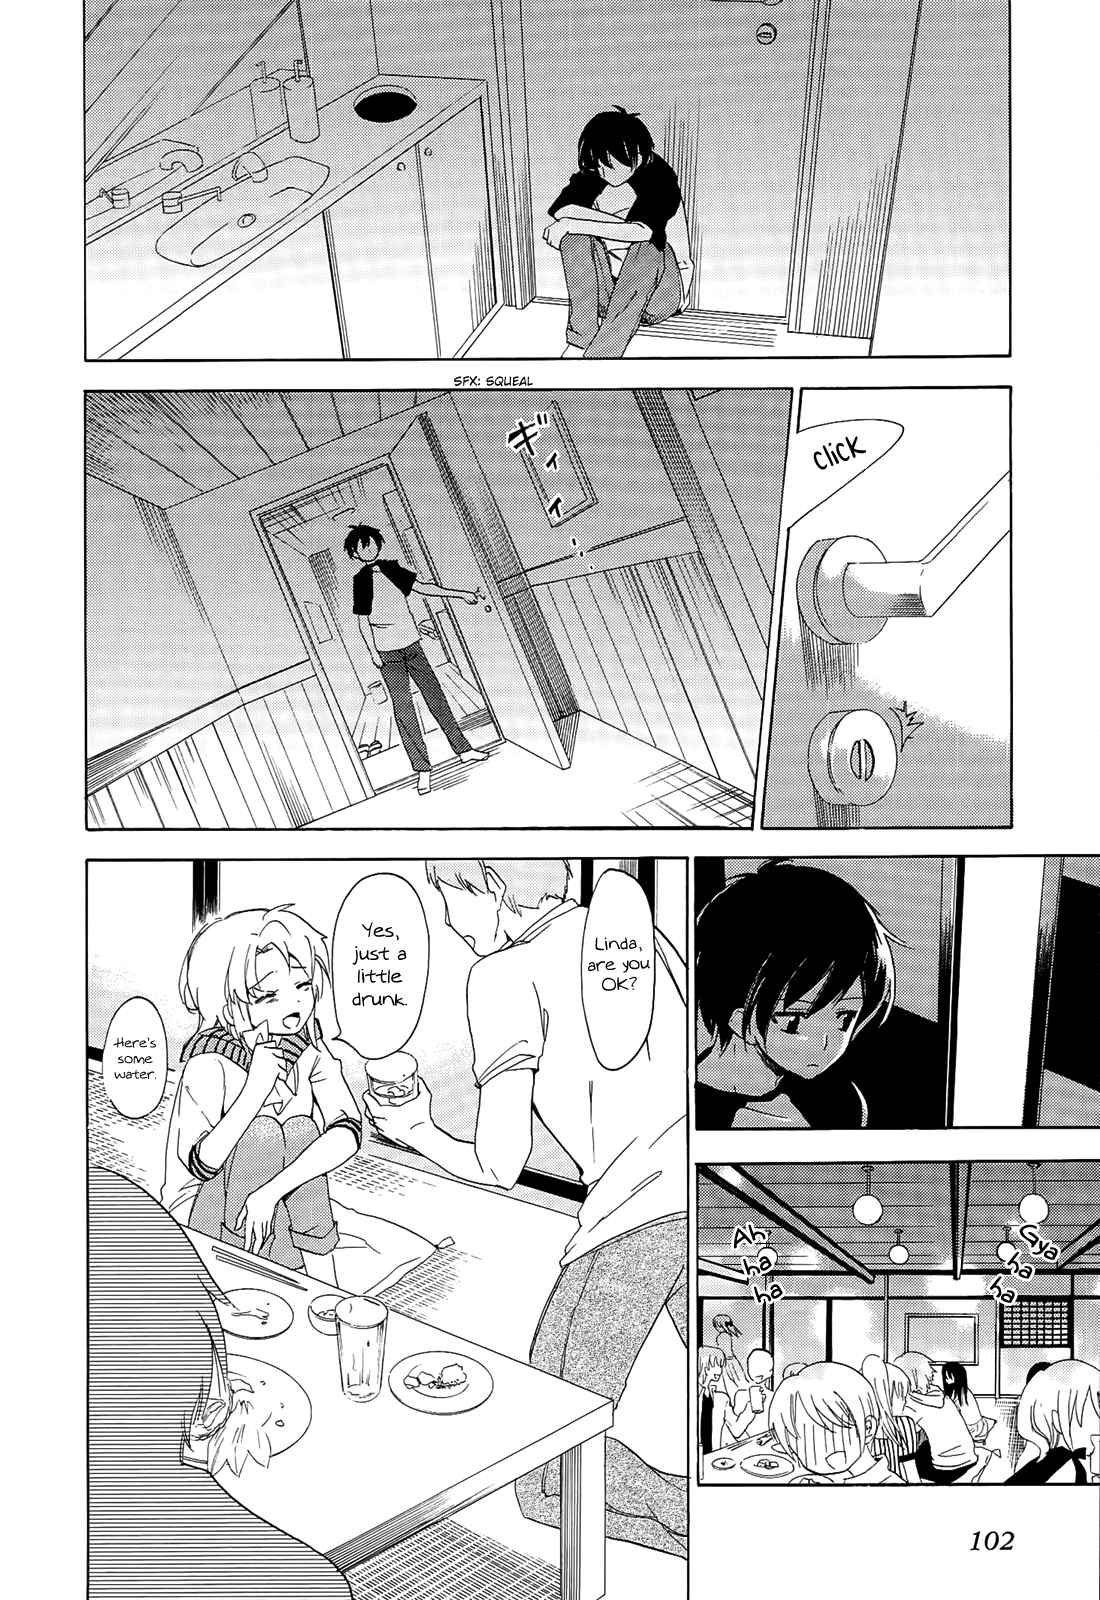 Golden Time Vol. 4 Ch. 21 The Answer is YES